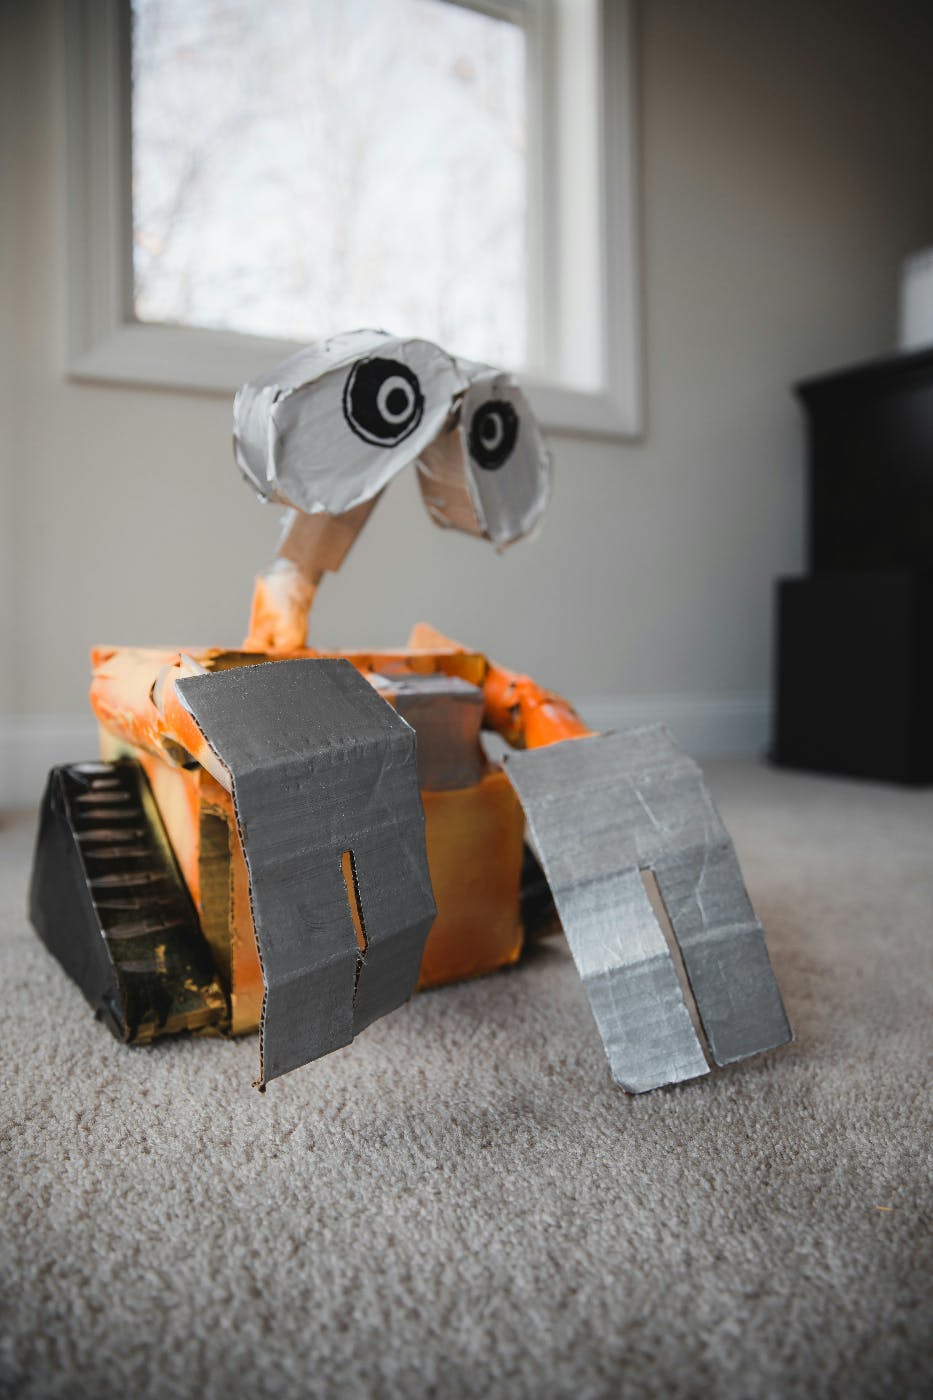 A wall-e robot made of cardboard and duct tape